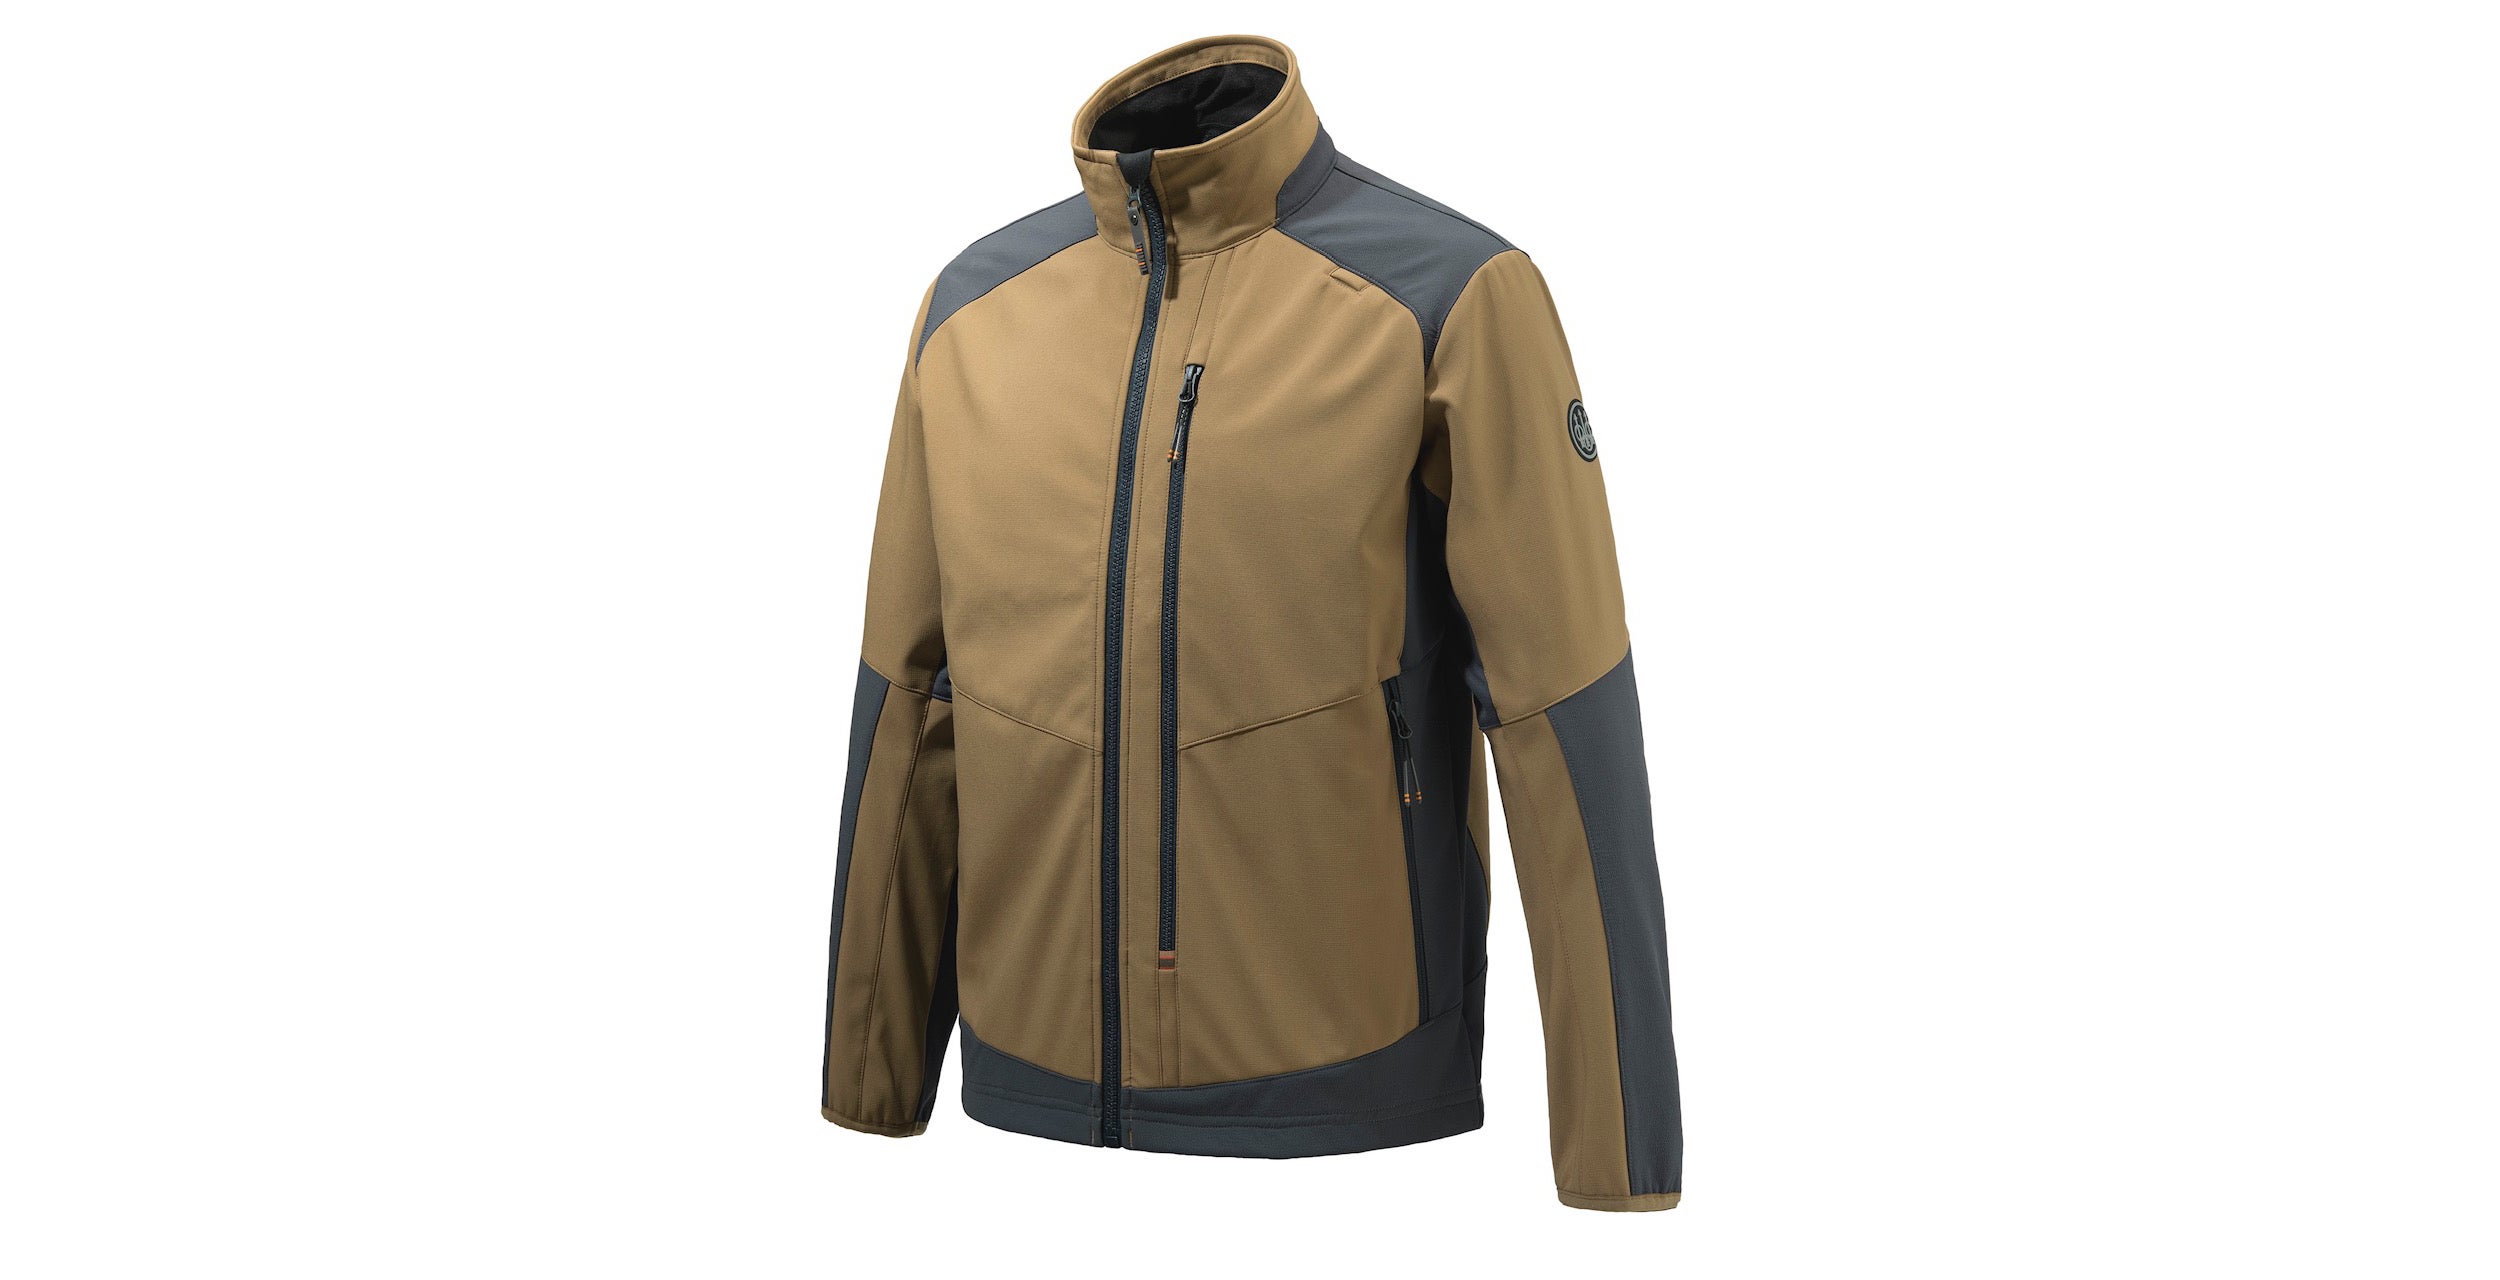 NEW Beretta Apparel – Butte, Thorn Resistant EVO, and Windstryke Hoody